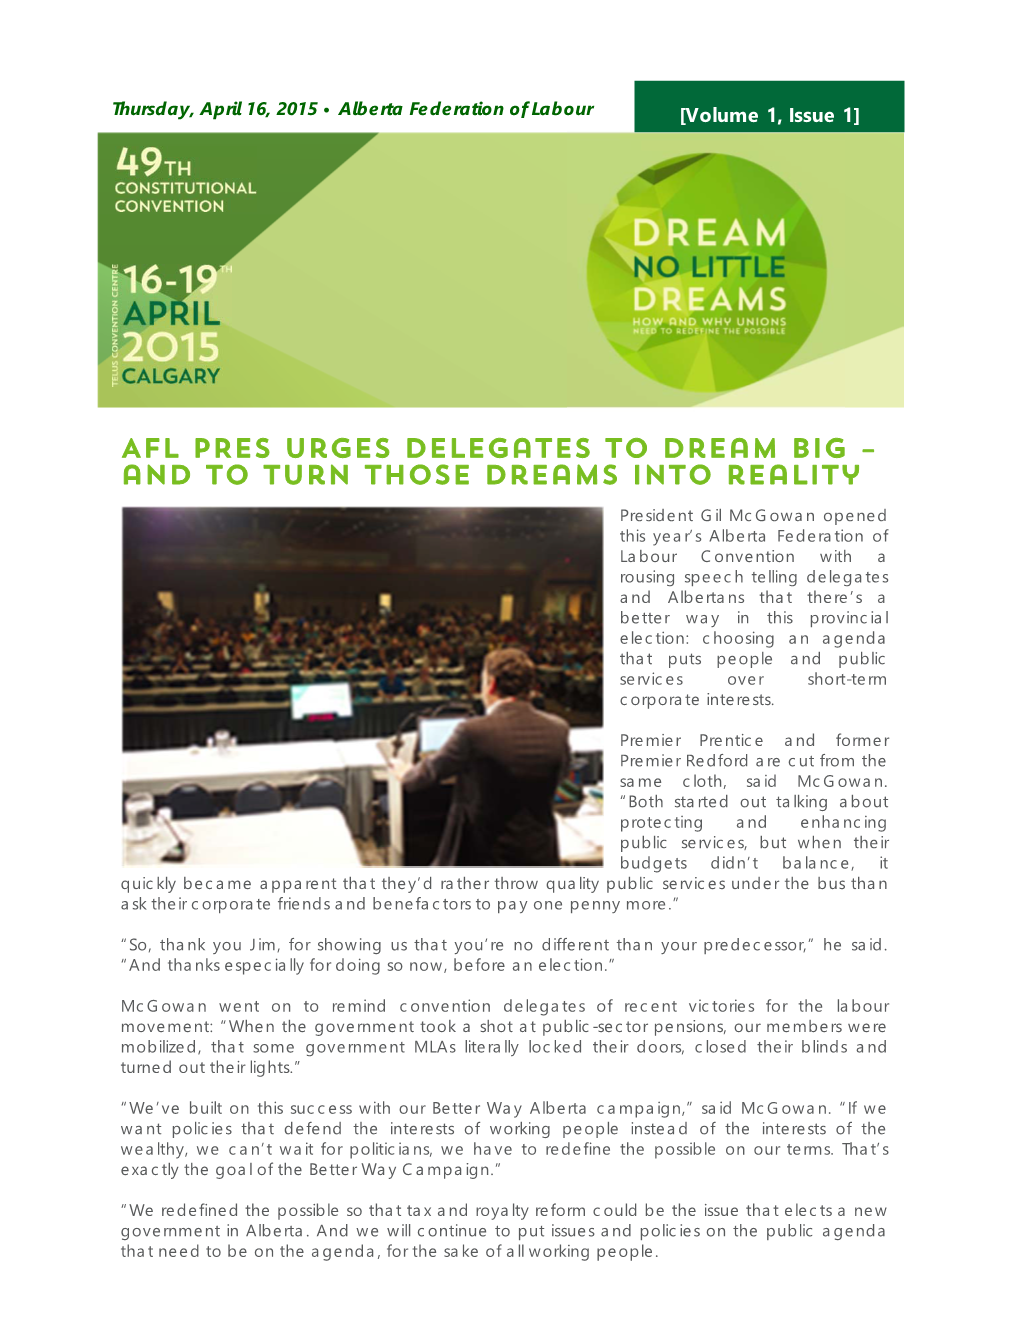 AFL PRES Urges Delegates to Dream Big – and to Turn Those Dreams Into Reality